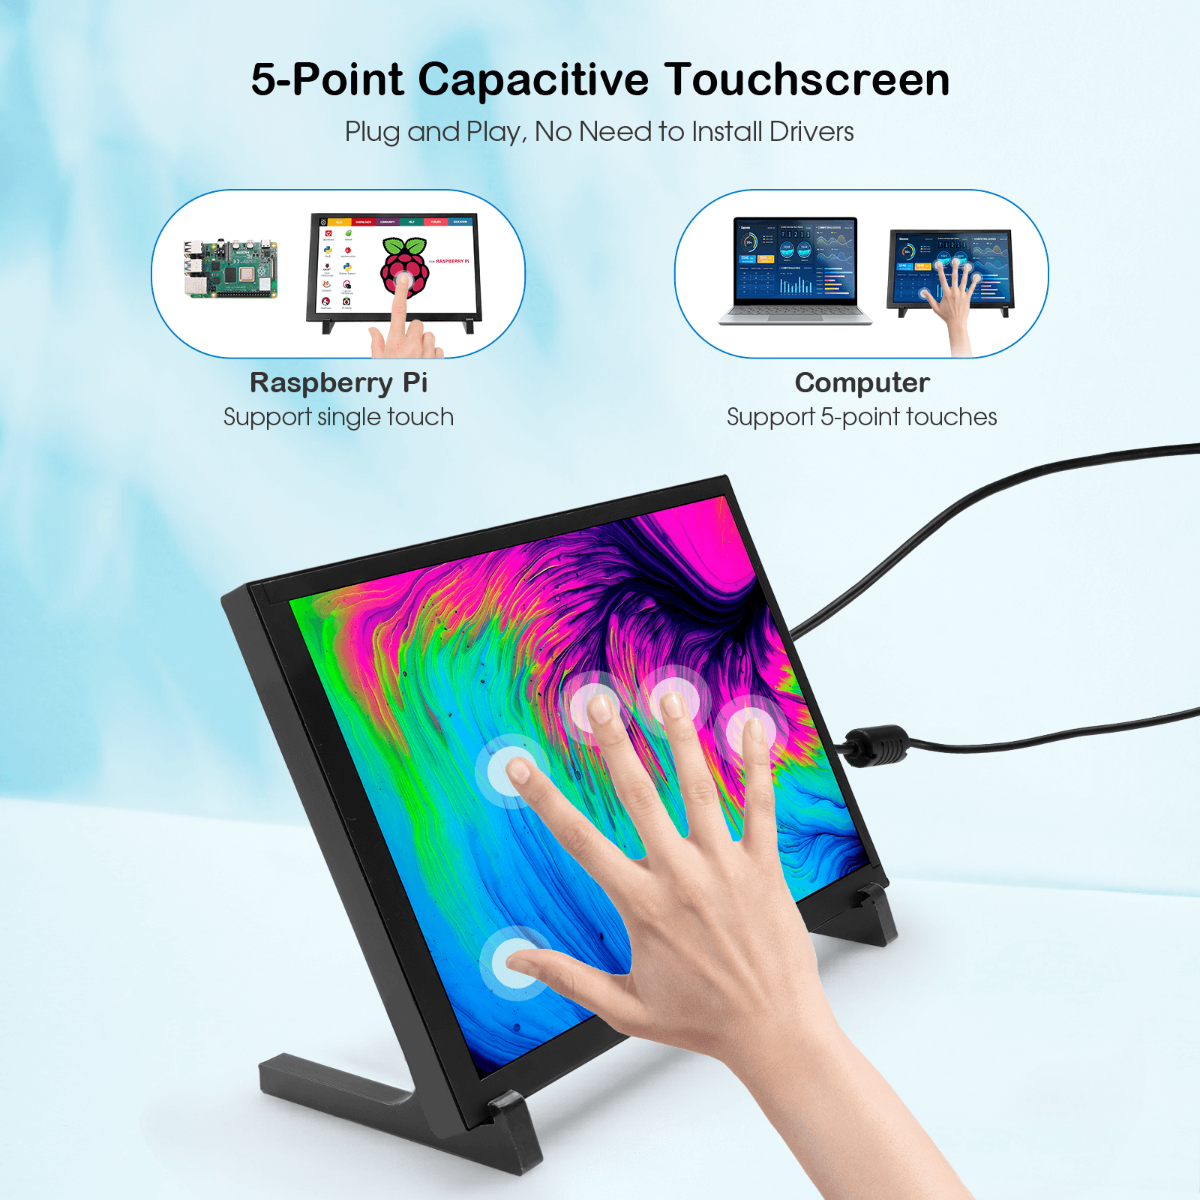 5-Point Capacitive Touchscreen monitor